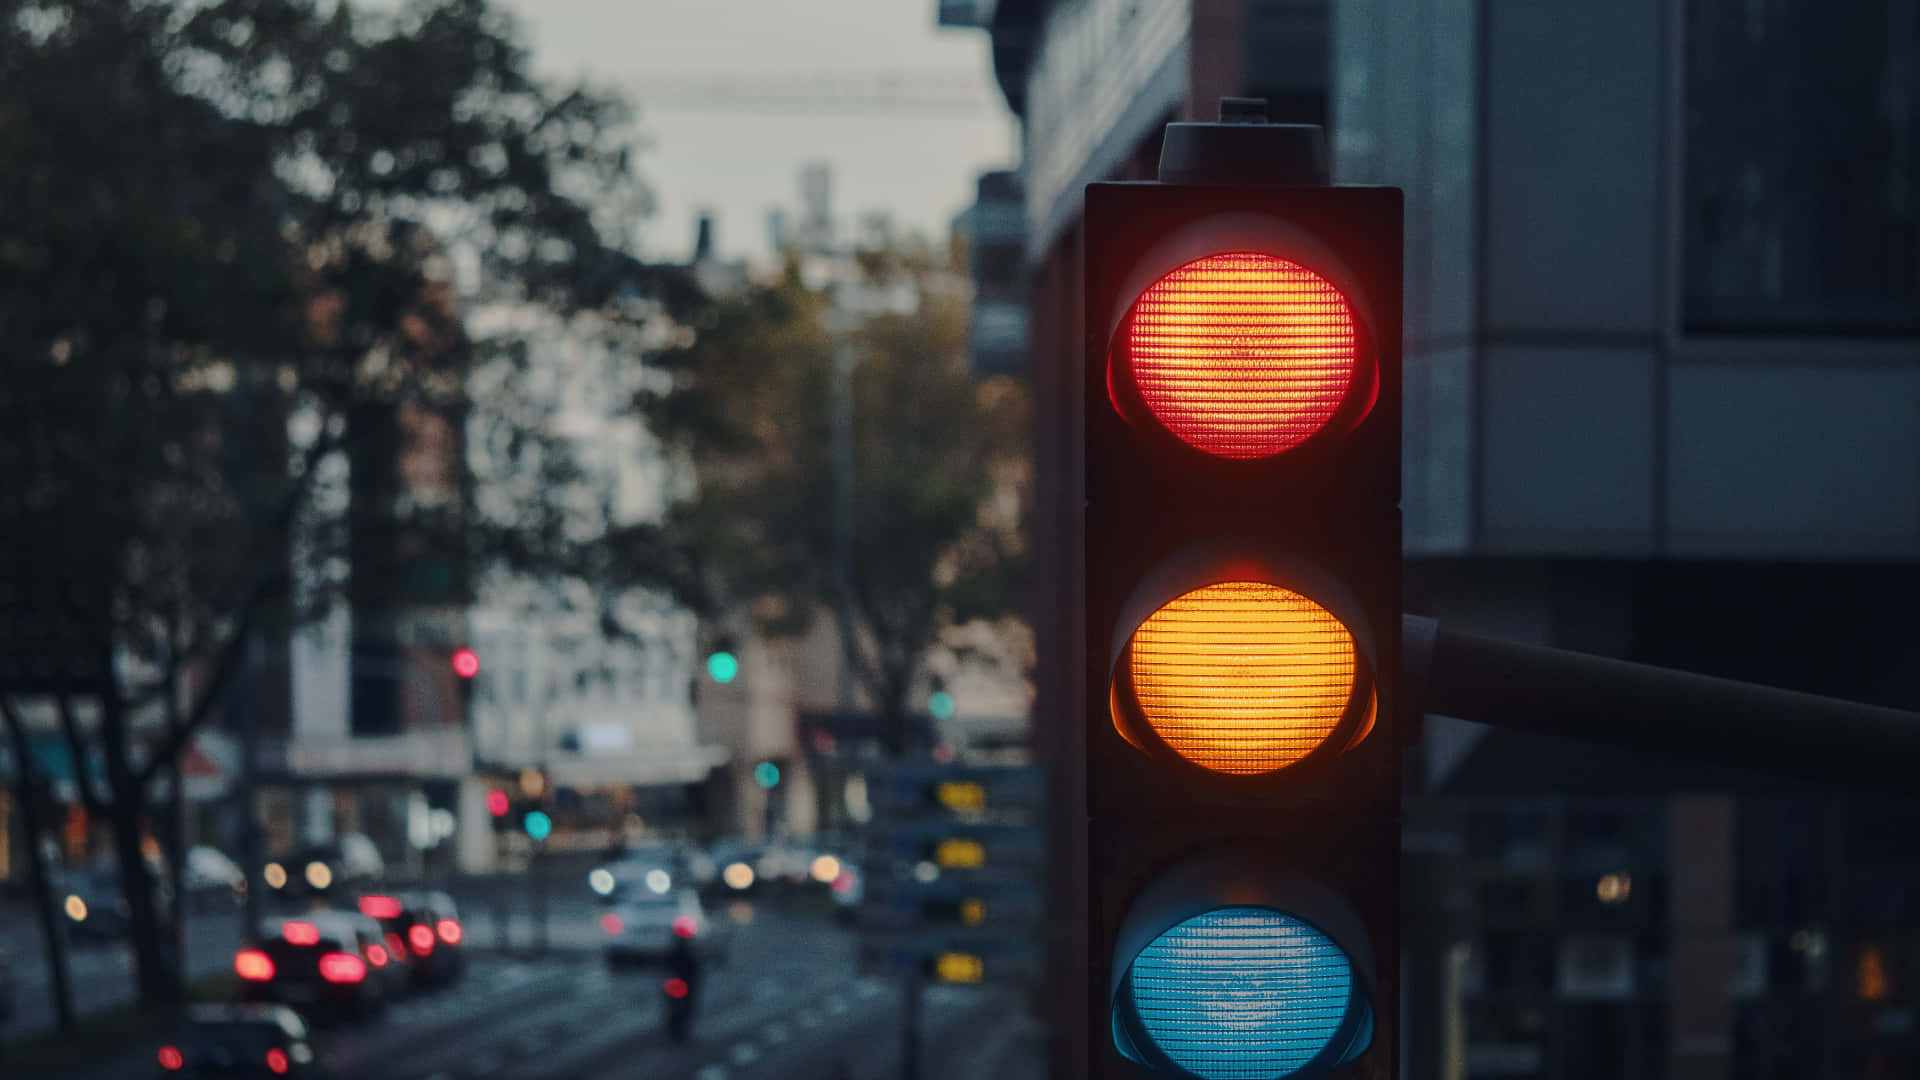 Traffic Lights In A City